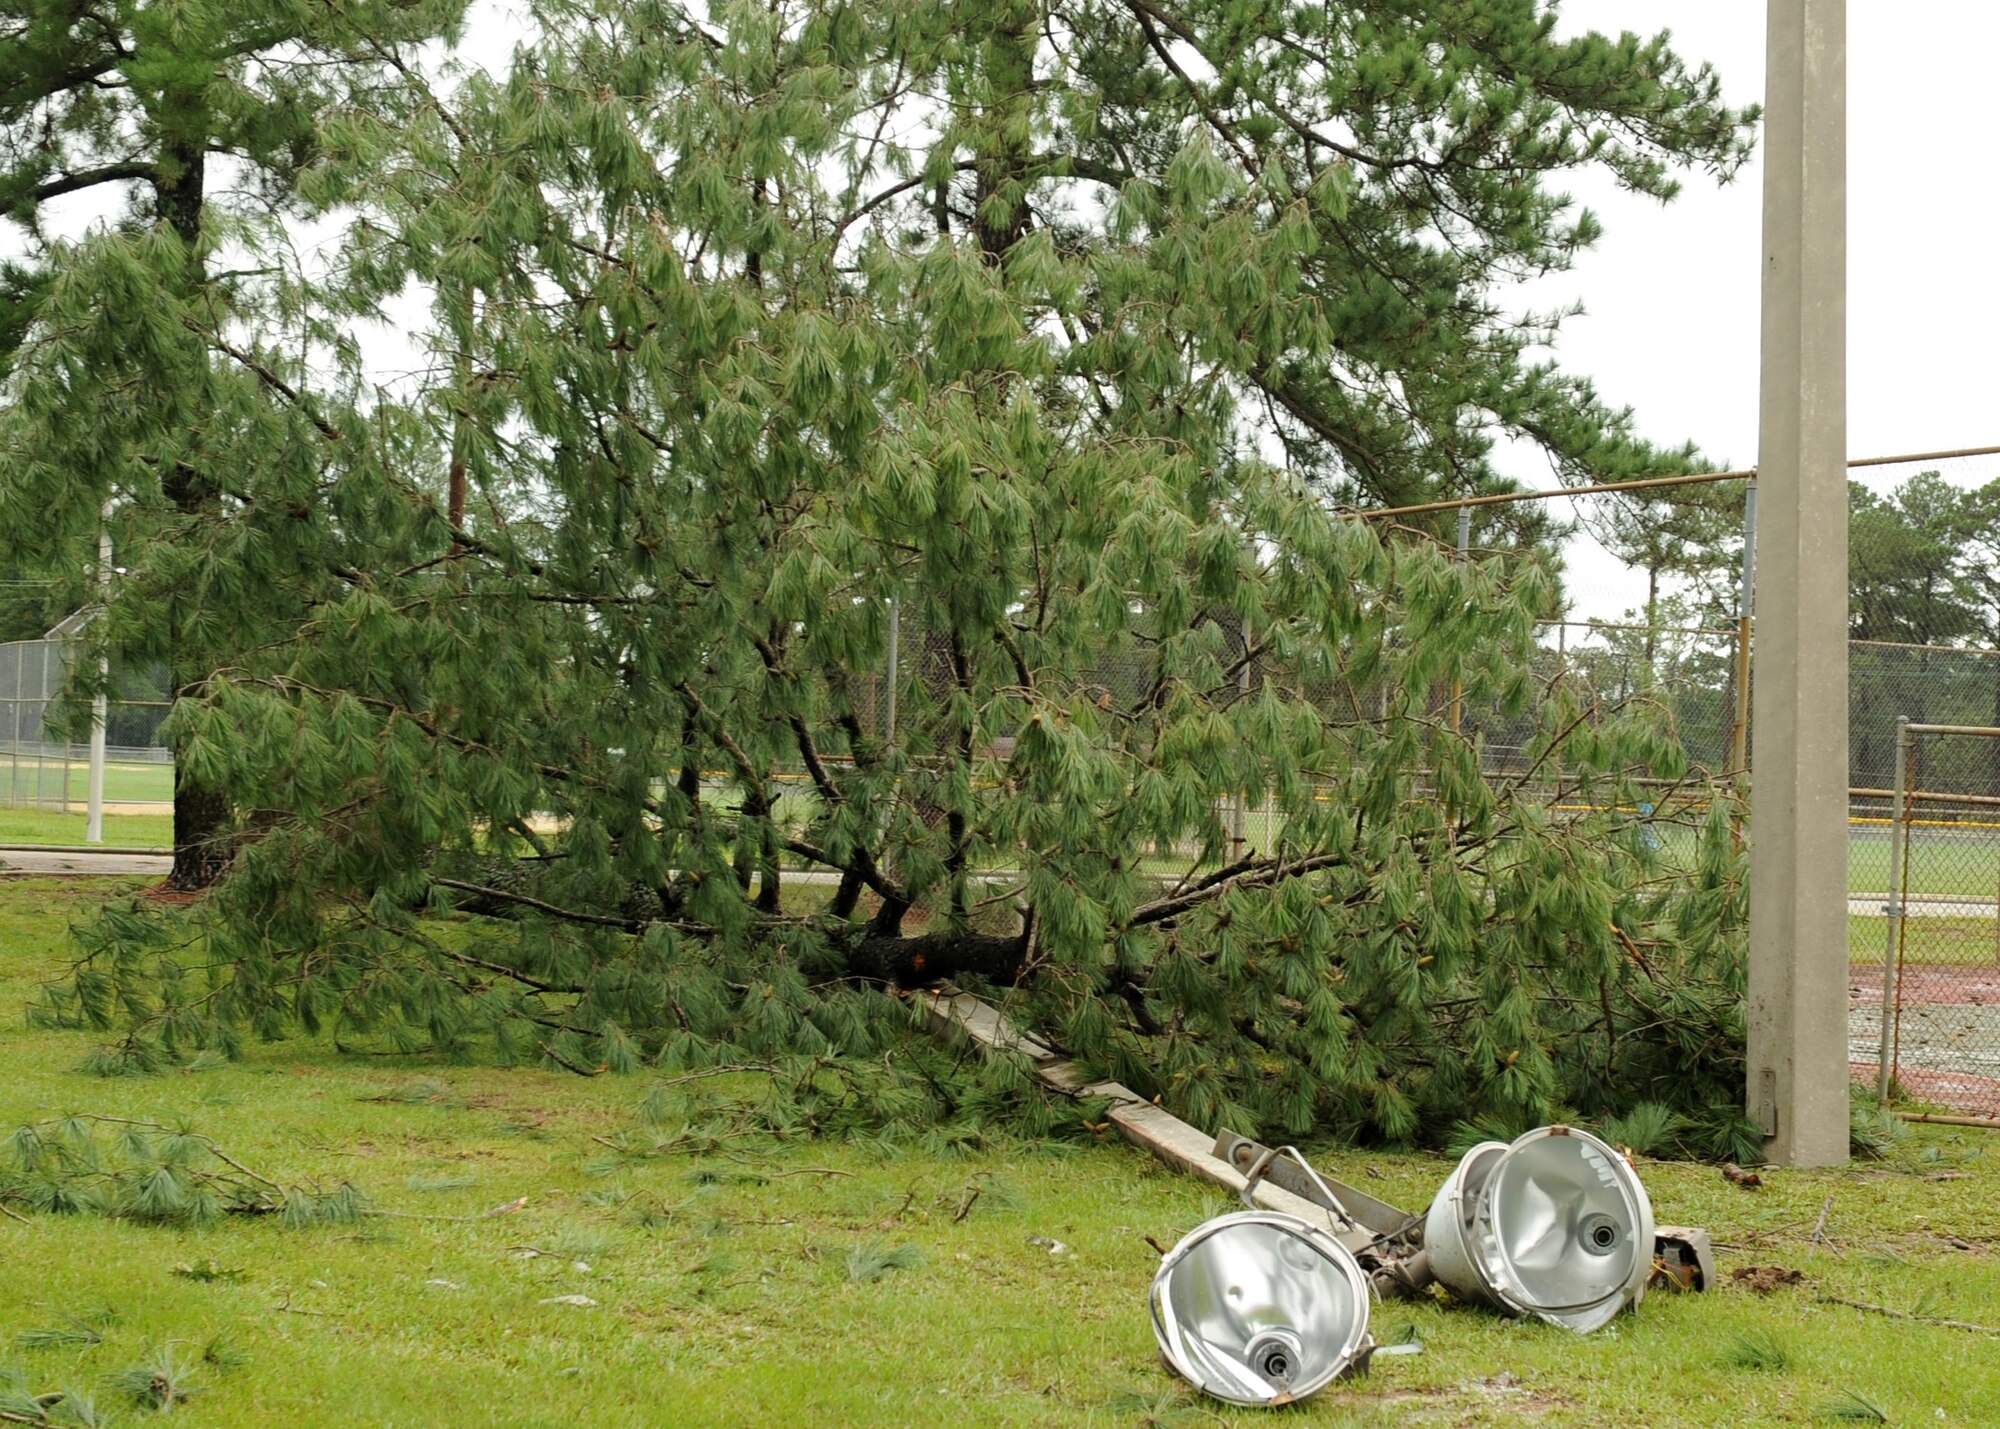 A substantial tree murders a light-all while breaking the glass over the lights. Hurricane Hanna brought strong winds and rain through Seymour Johnson AFB the night of September 5, 2008. (U. S. Air Force photo by Airman 1st Class Whitney Stanfield)